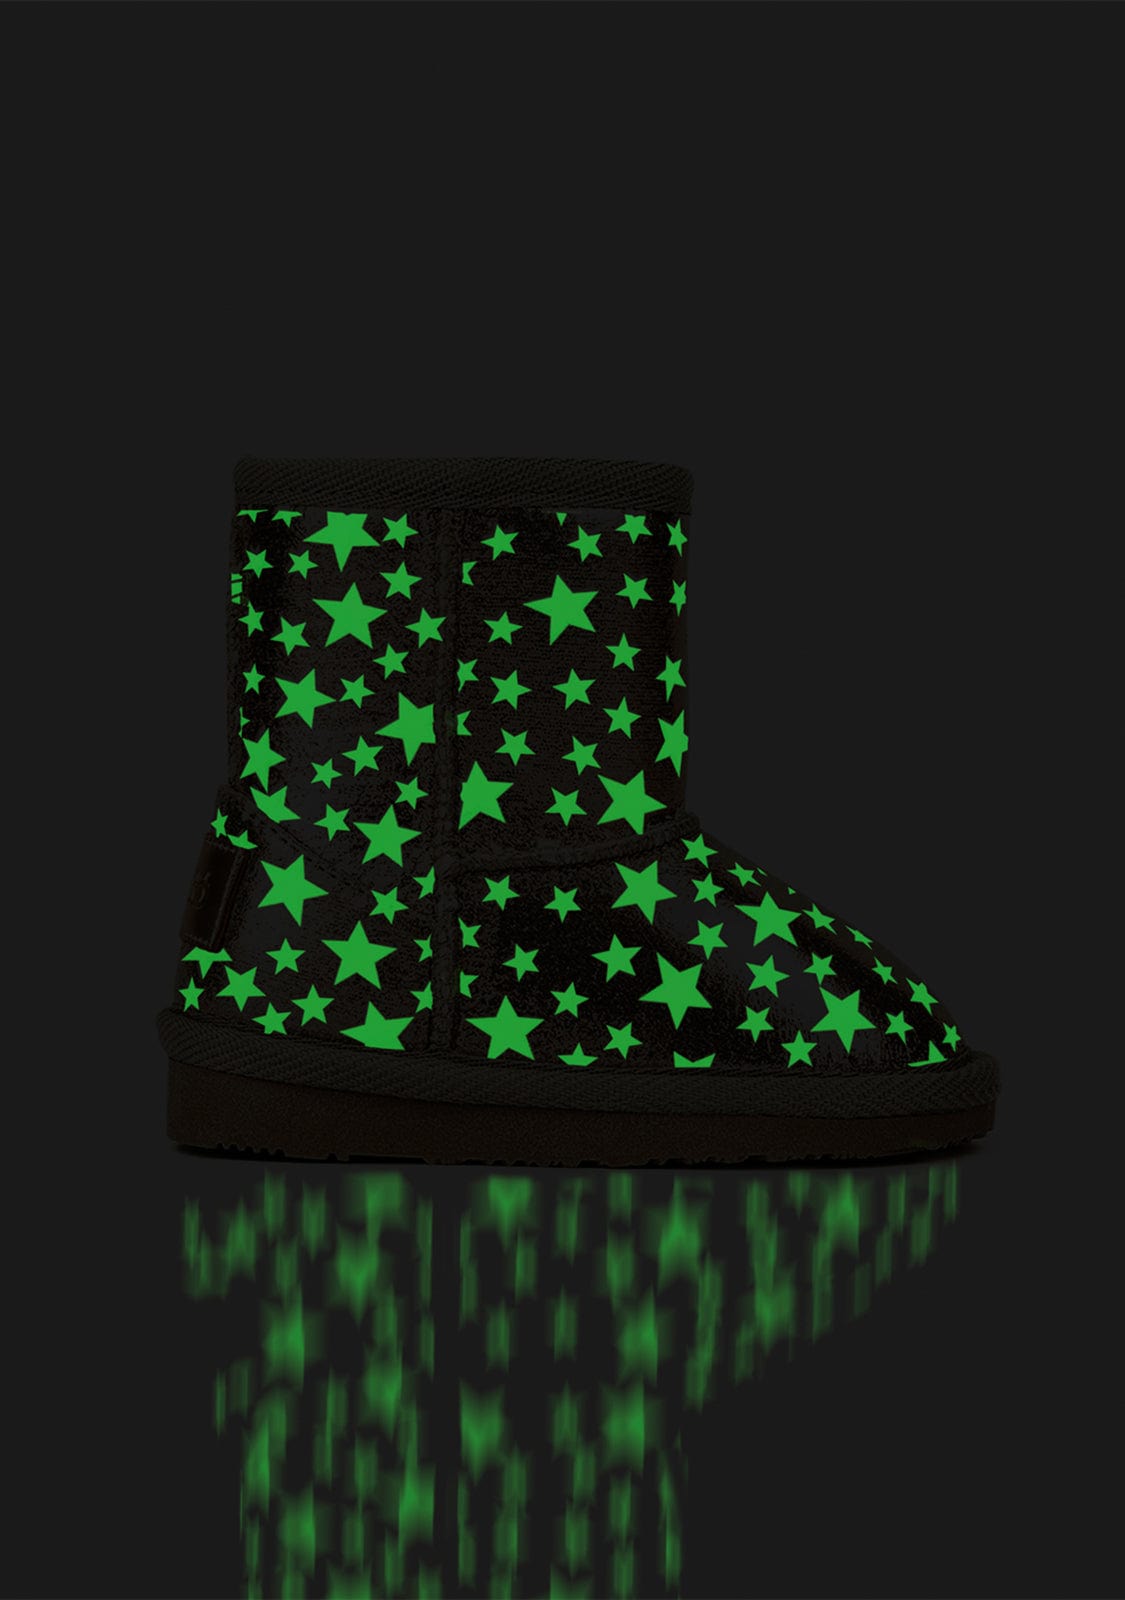 OSITO Shoes Baby's Magnesium Glows in the Dark Australian Boots